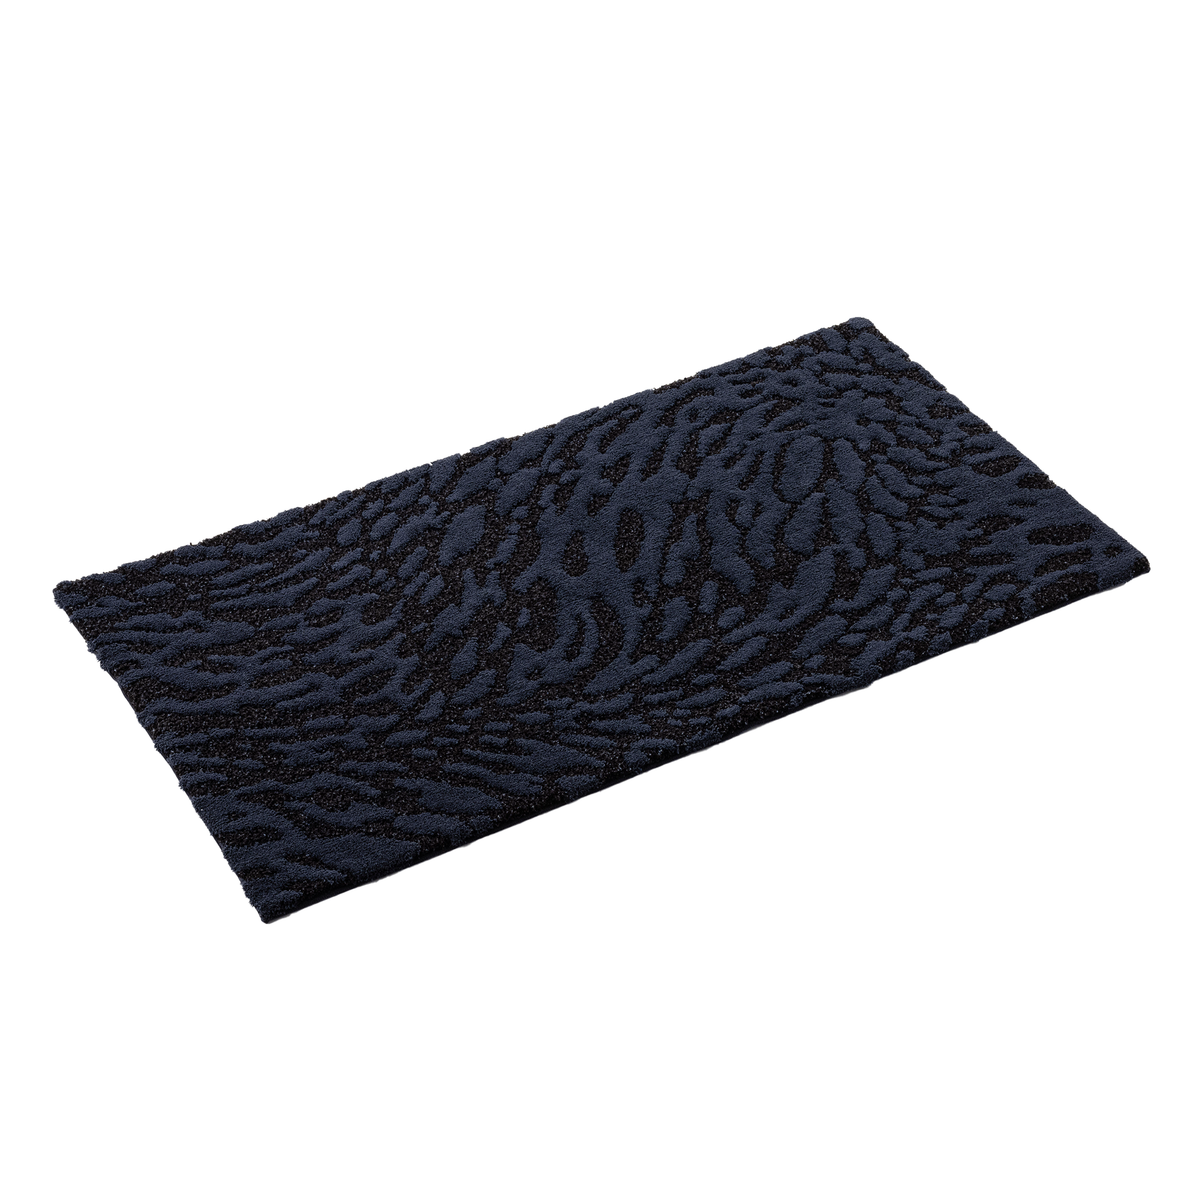 Slant Image of Abyss Habidecor Flow Bath Rugs in Color Black (990)